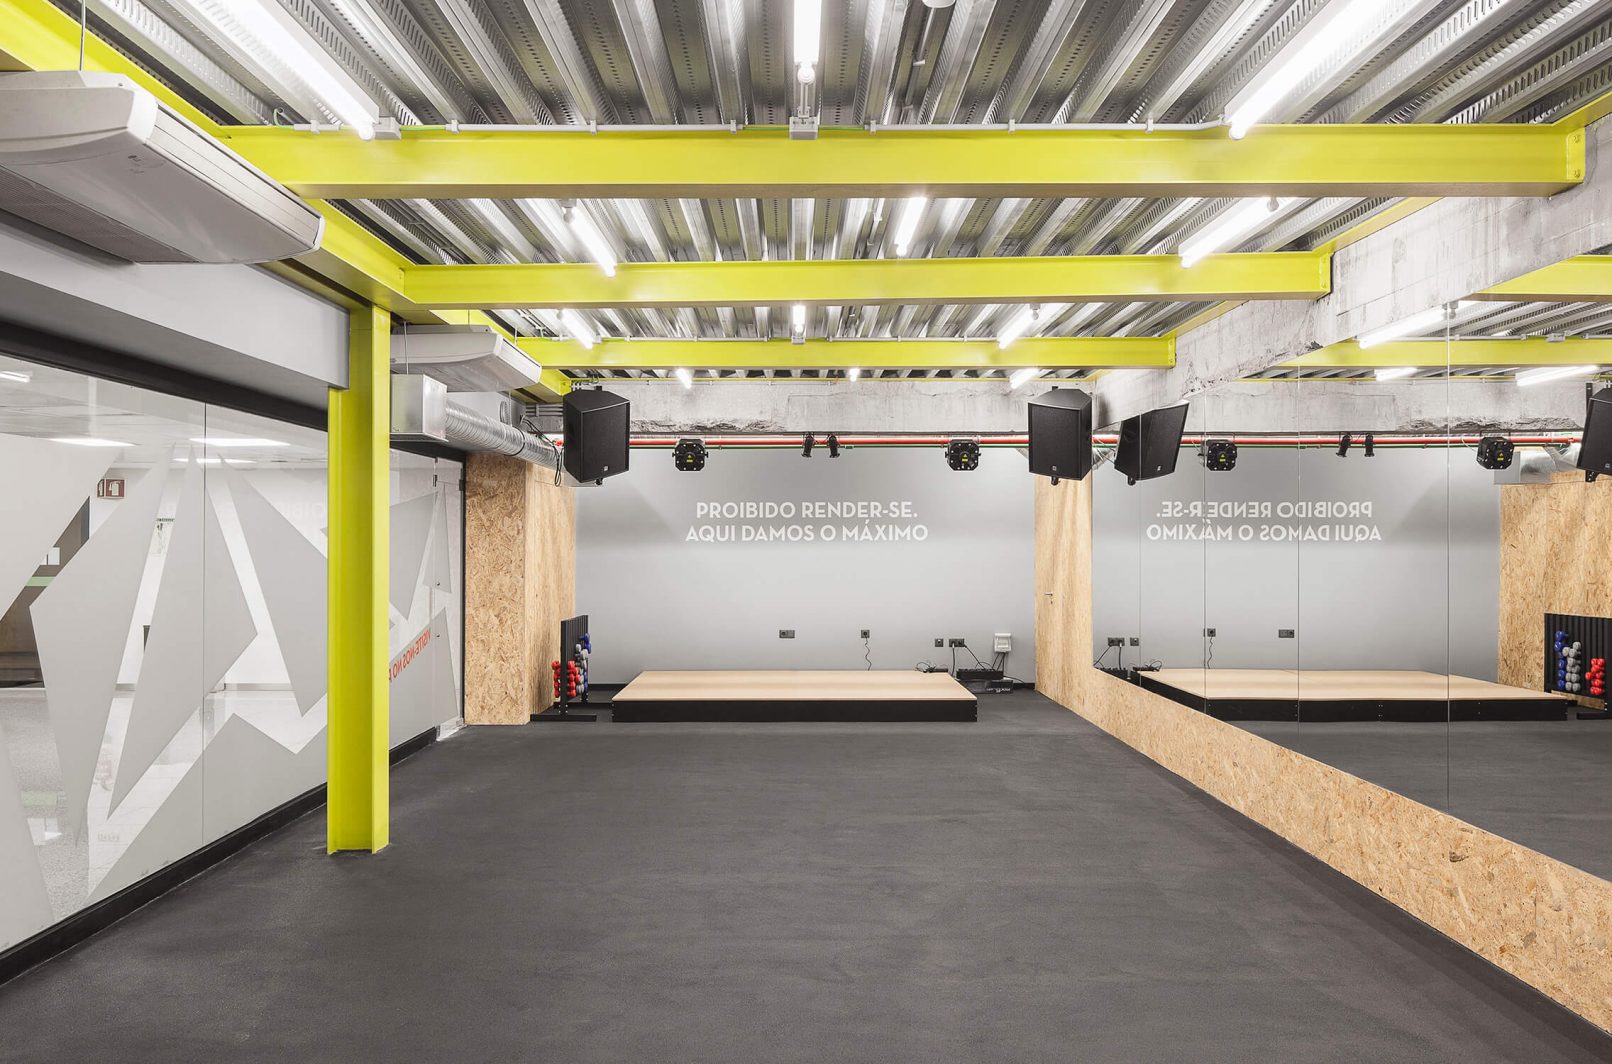 The beam structure that supports the ceiling was painted in yellow in order to give a distinct identity to the fitness studio compared to the other spaces.